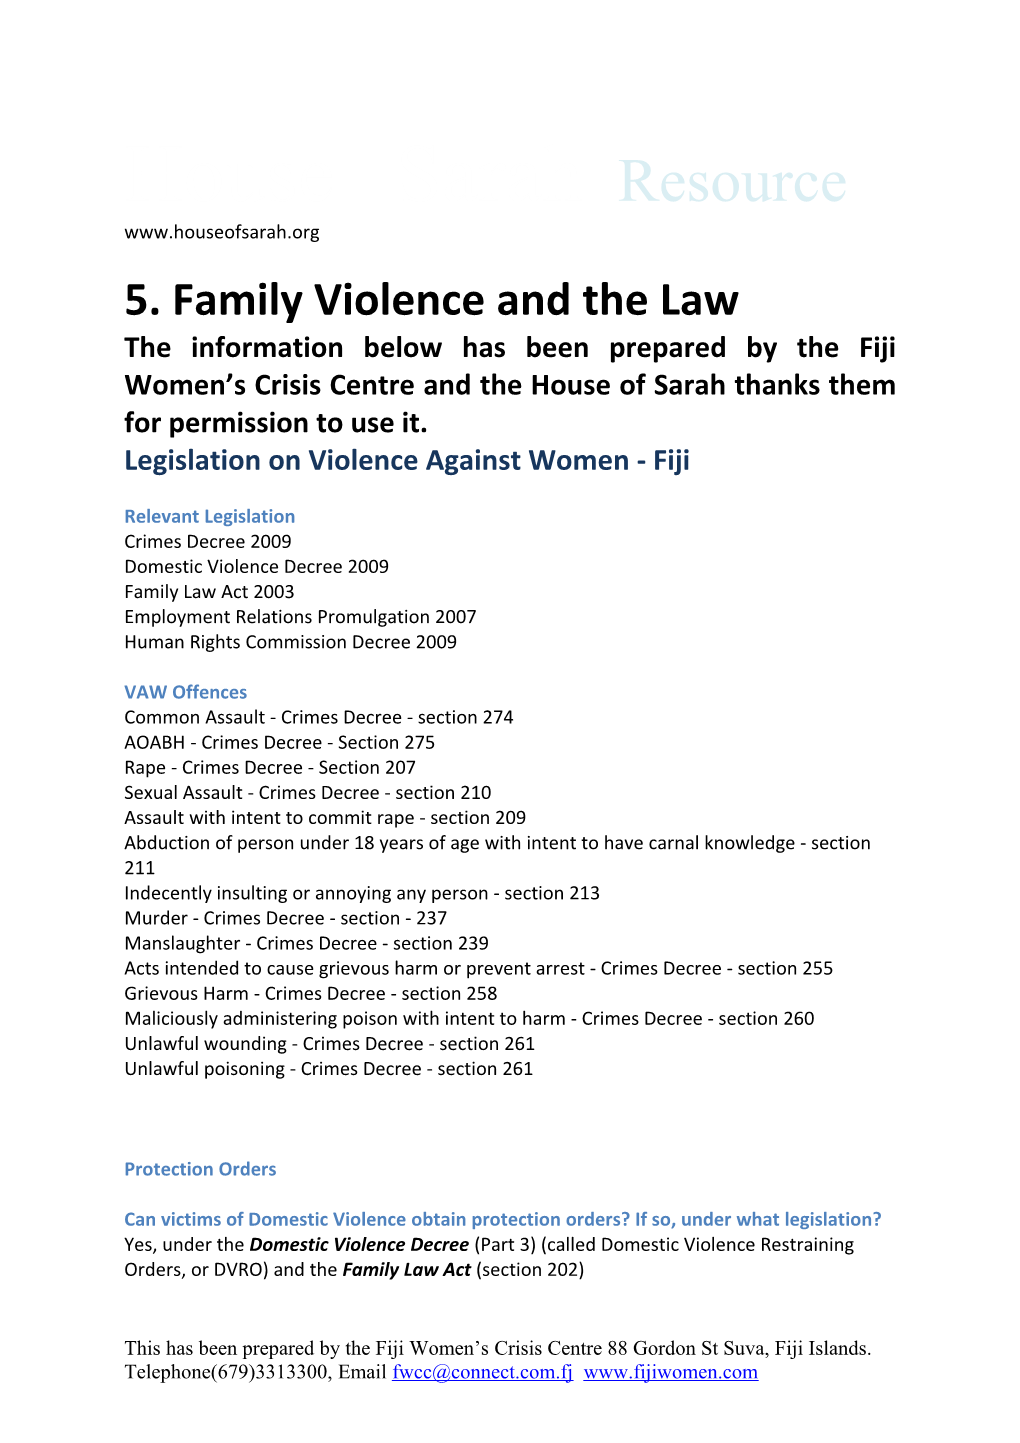 5. Family Violence and the Law